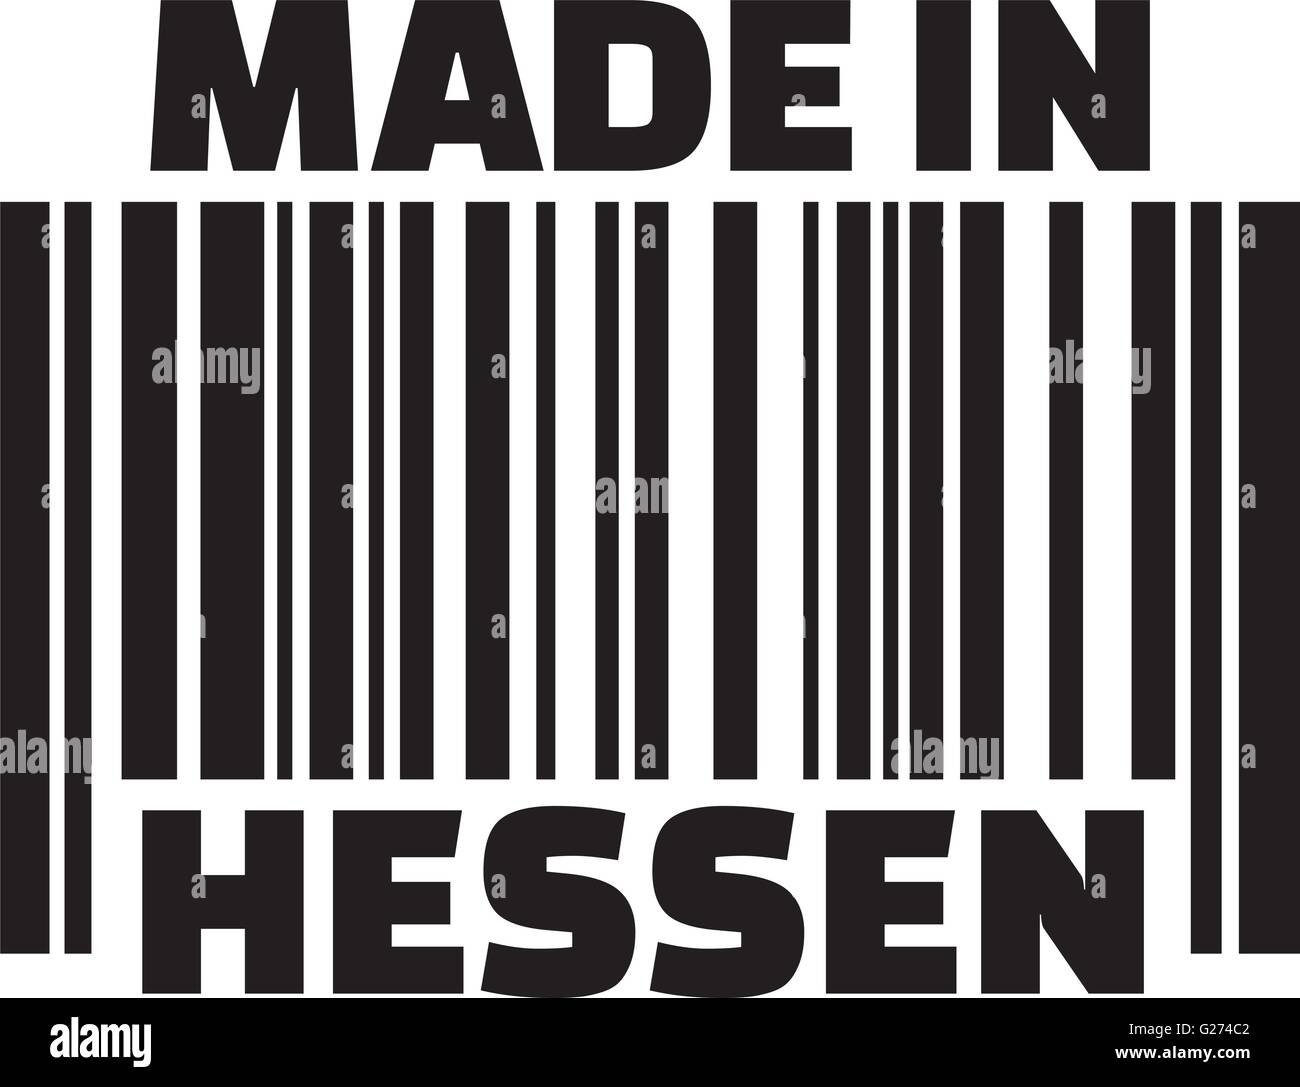 Made in Hesse barcode german Stock Vector